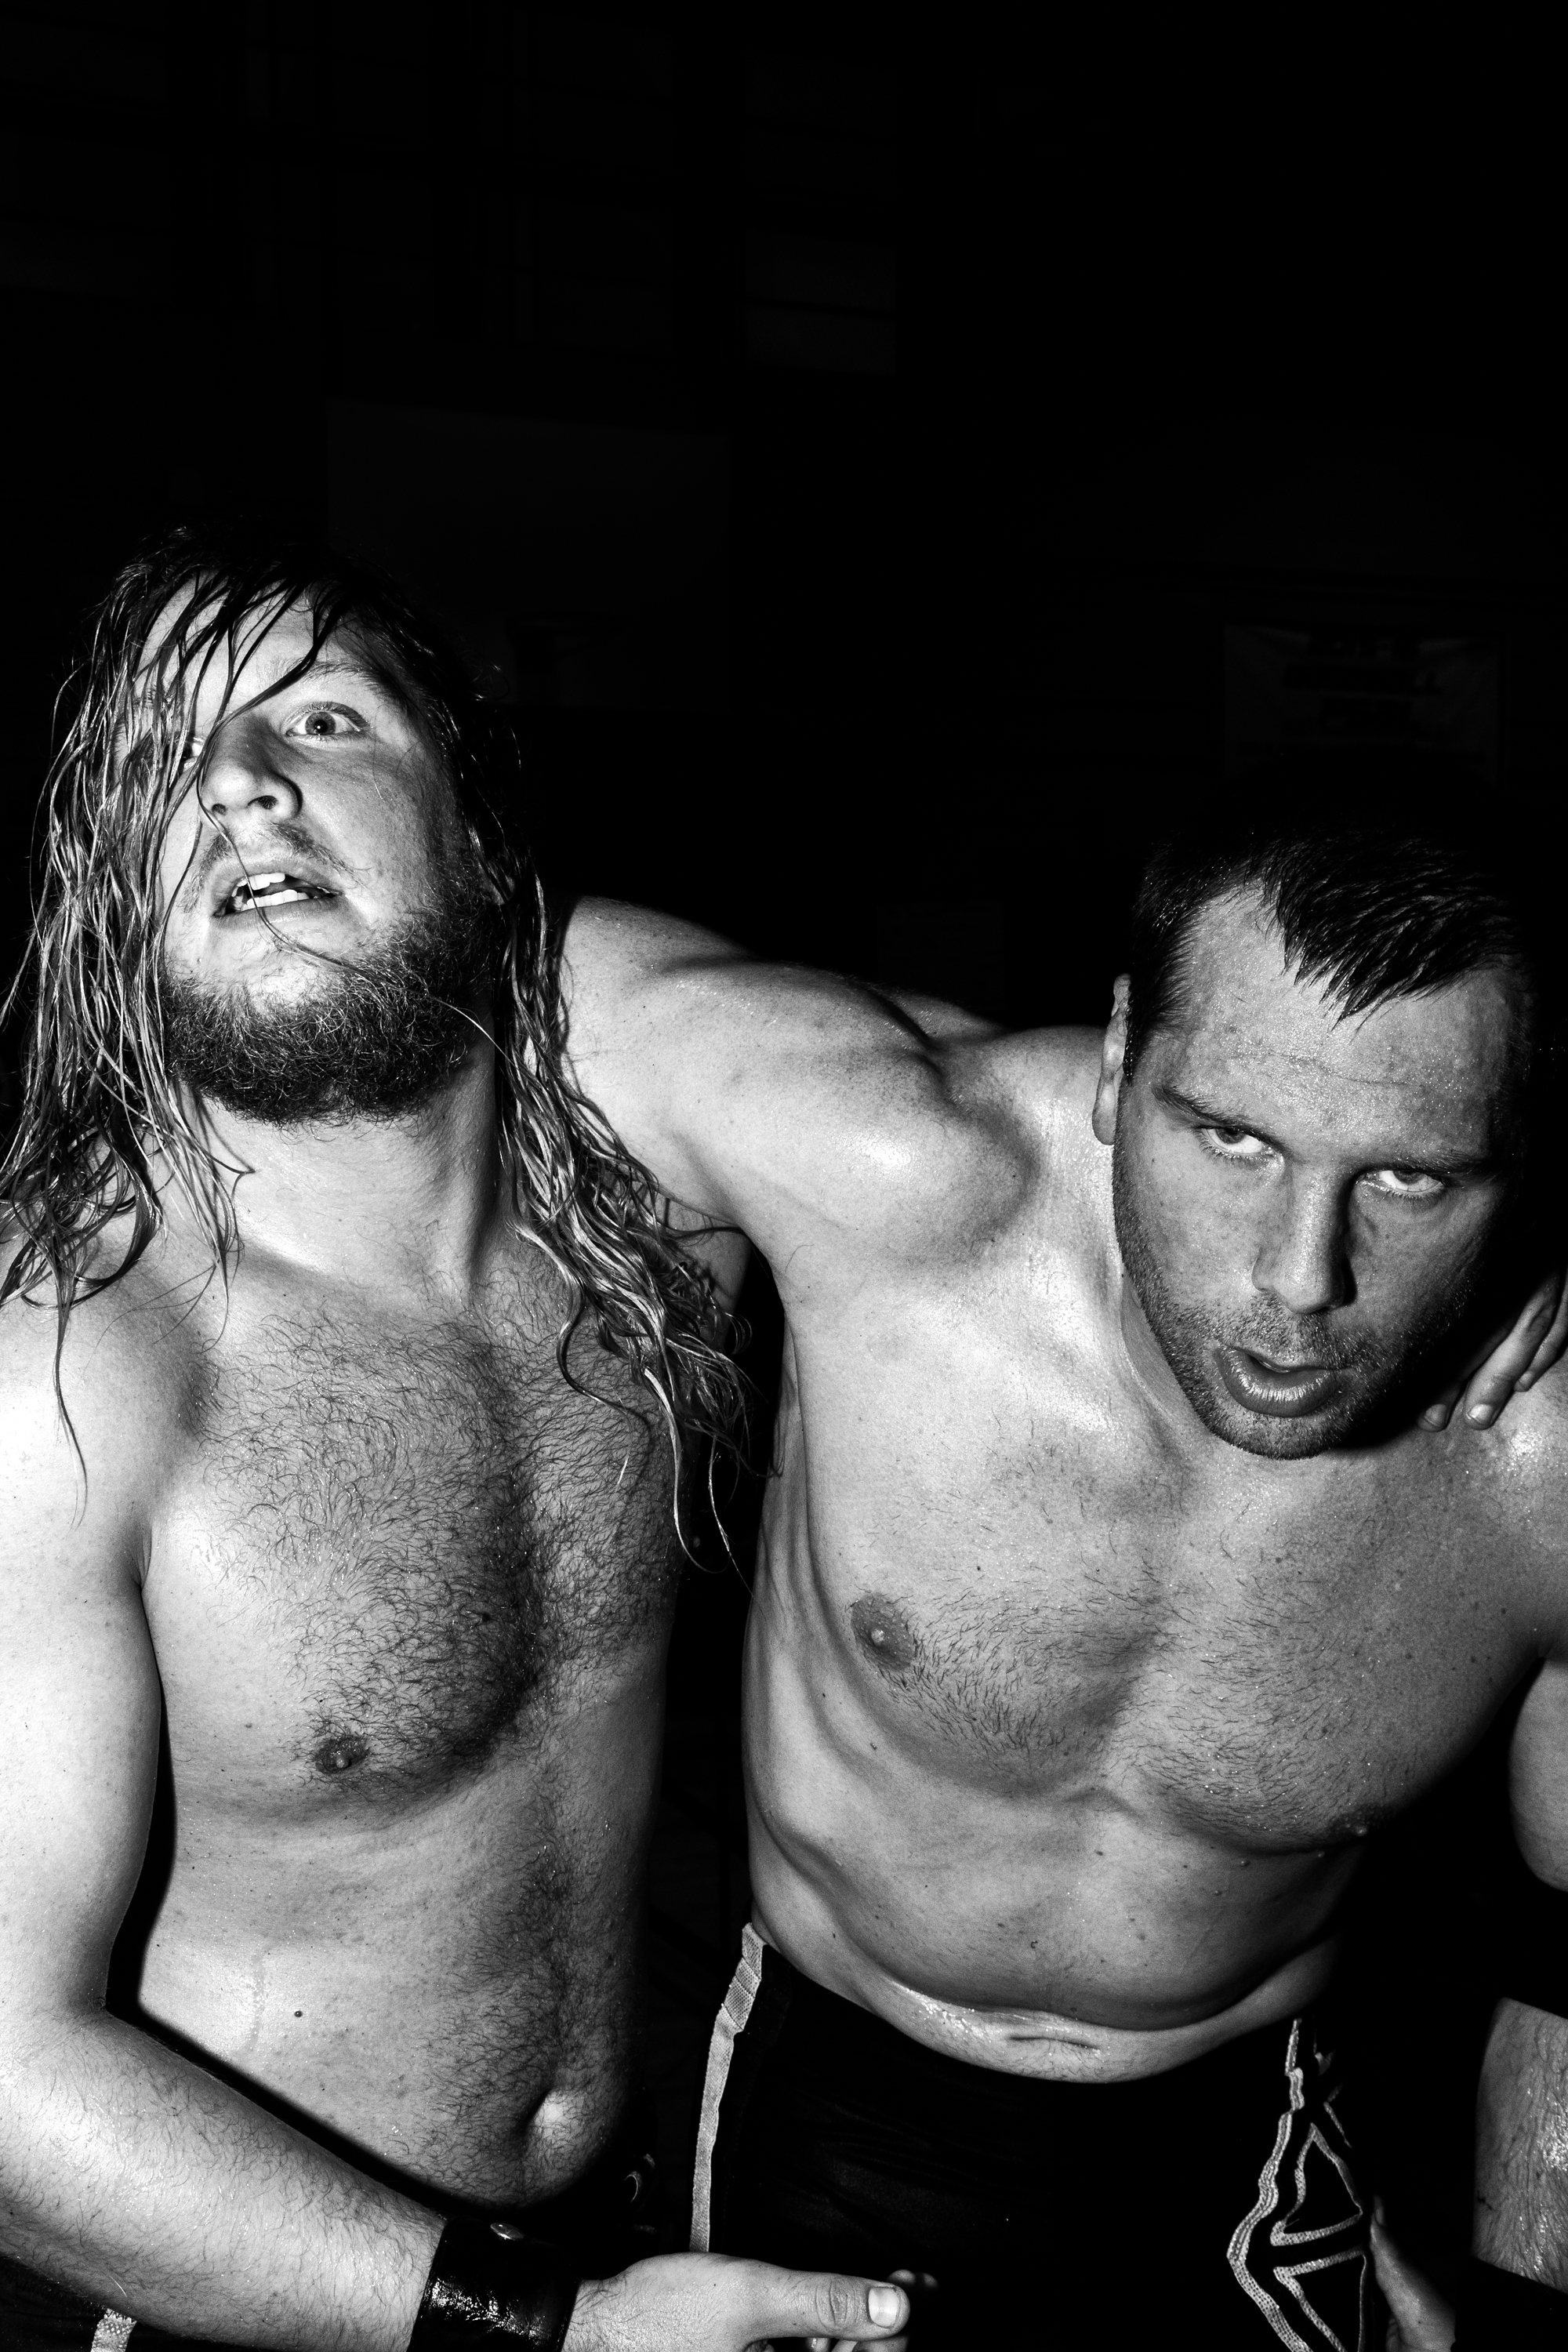 Battle Club Pro
940 Garrison Avenue 
Bronx, New York 10474
Graham Bell and Luke Langley recovering from the match